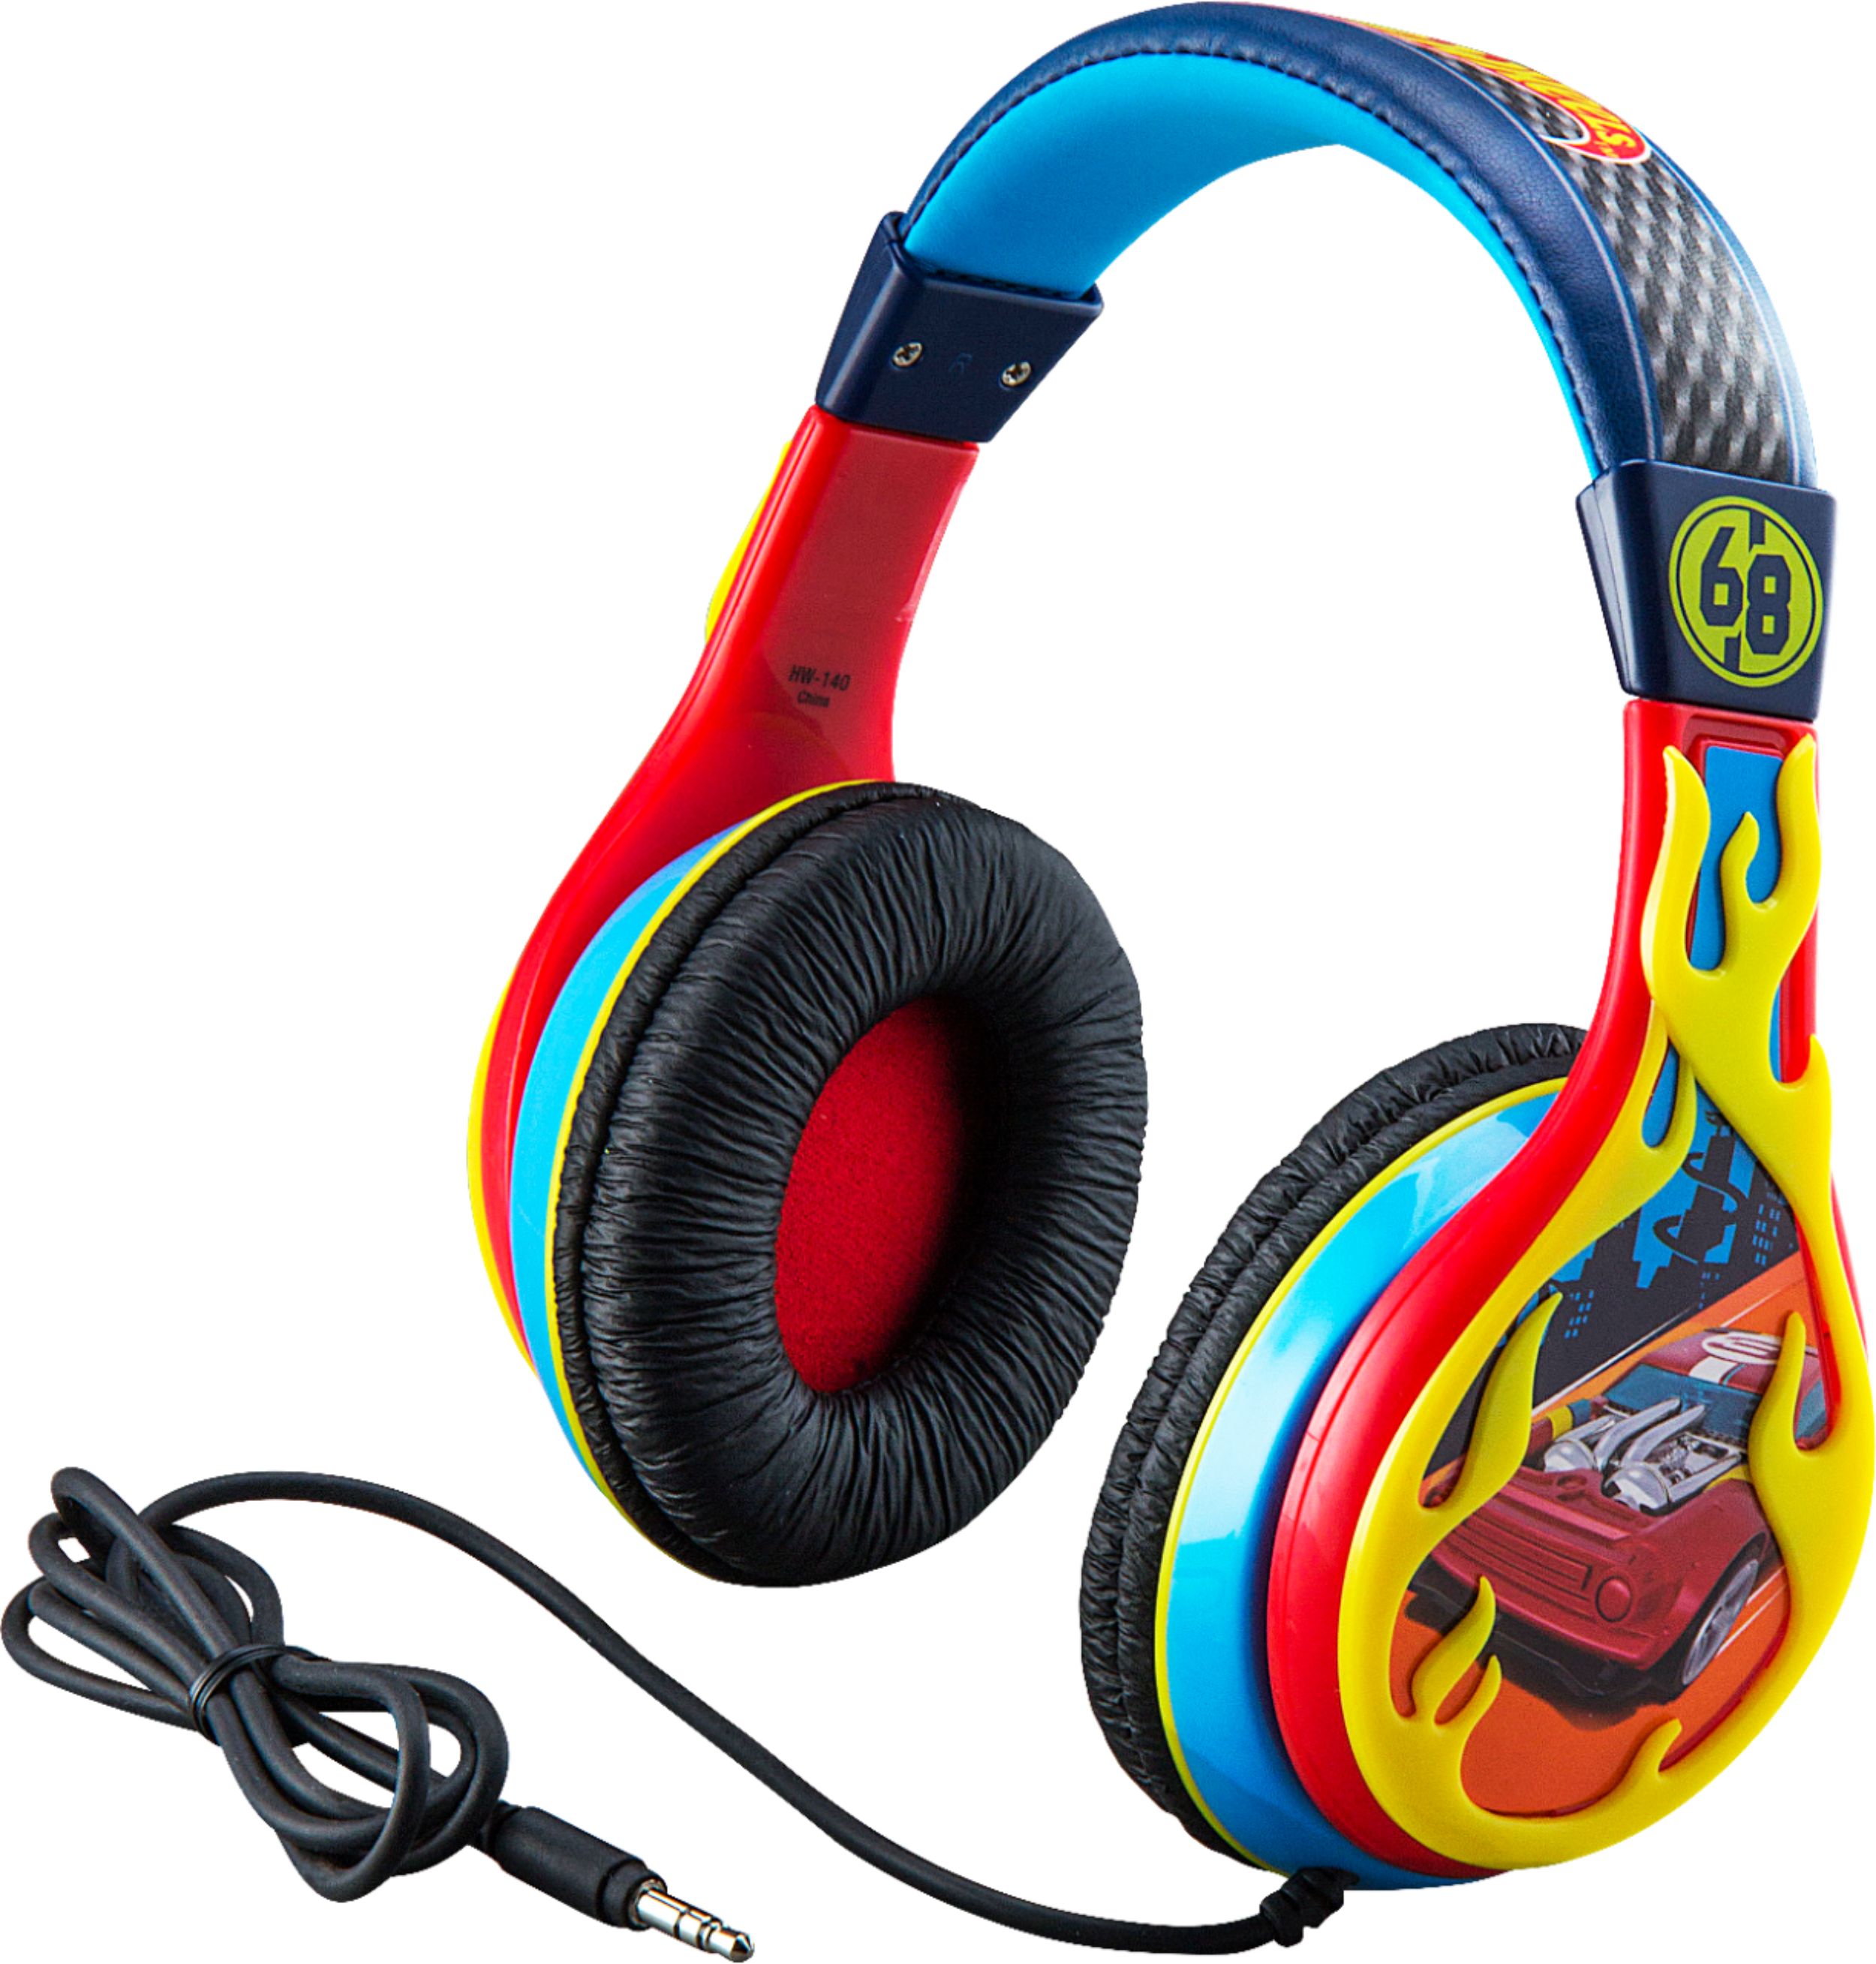 Angle View: eKids Hot Wheels Wired Over the Ear Headphones - yellow